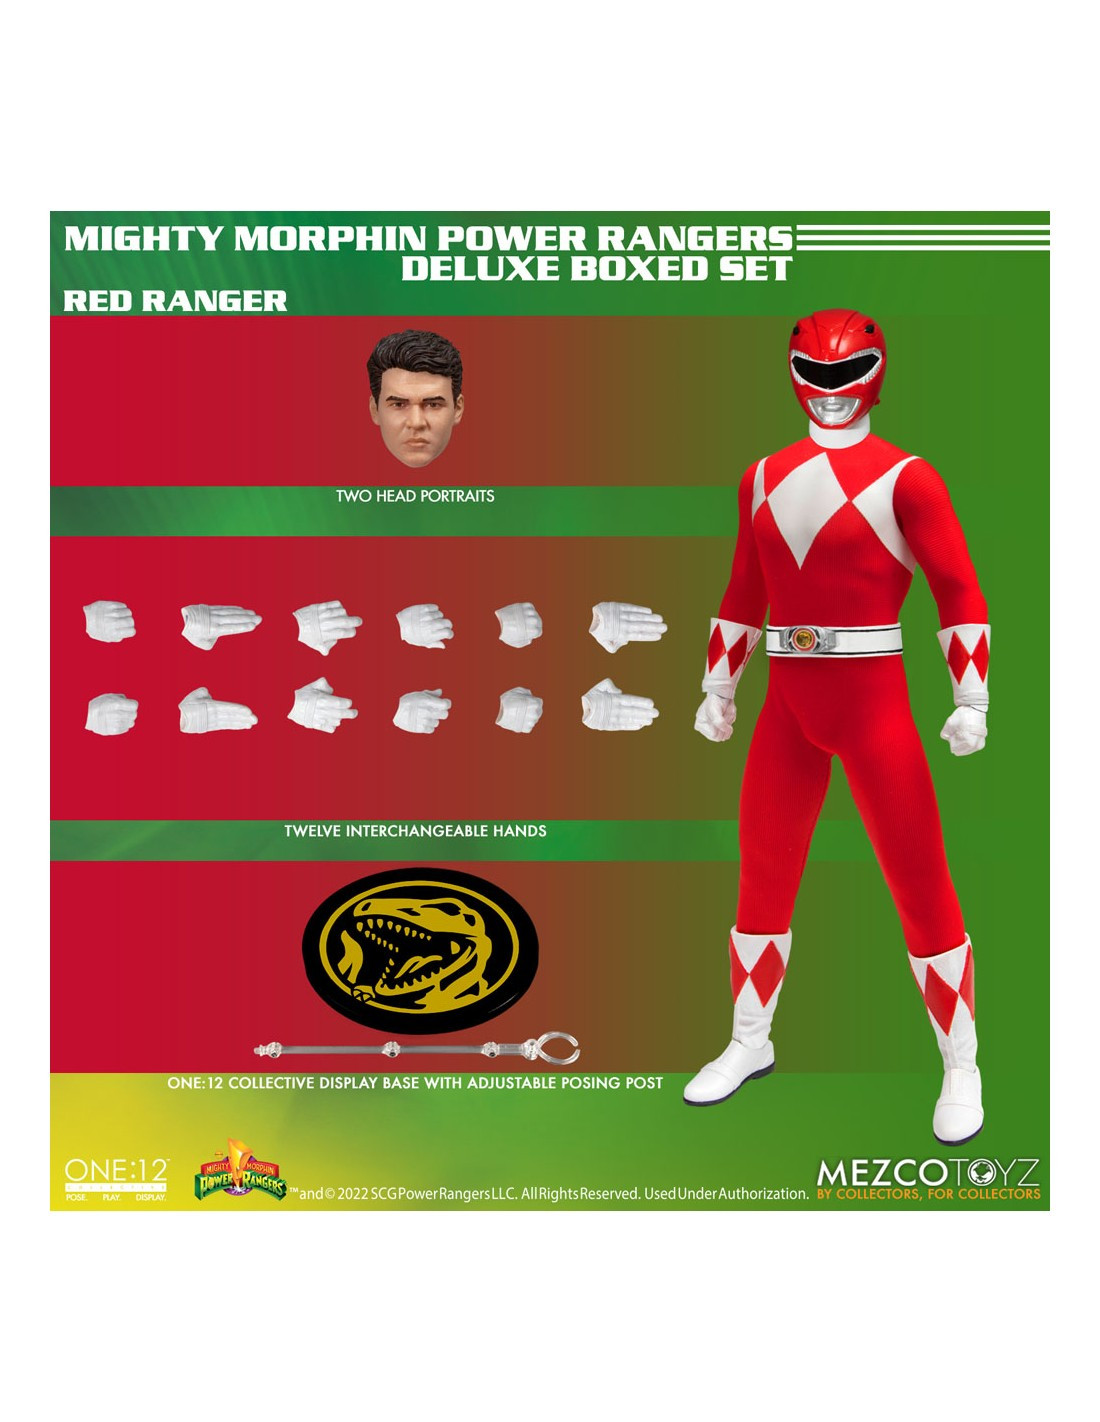 SET DELUXE POWER RANGERS 5 FIGURAS 17 CM MIGHTY MORPHIN POWER RANGERS THE ONE:12 COLLECTIVE